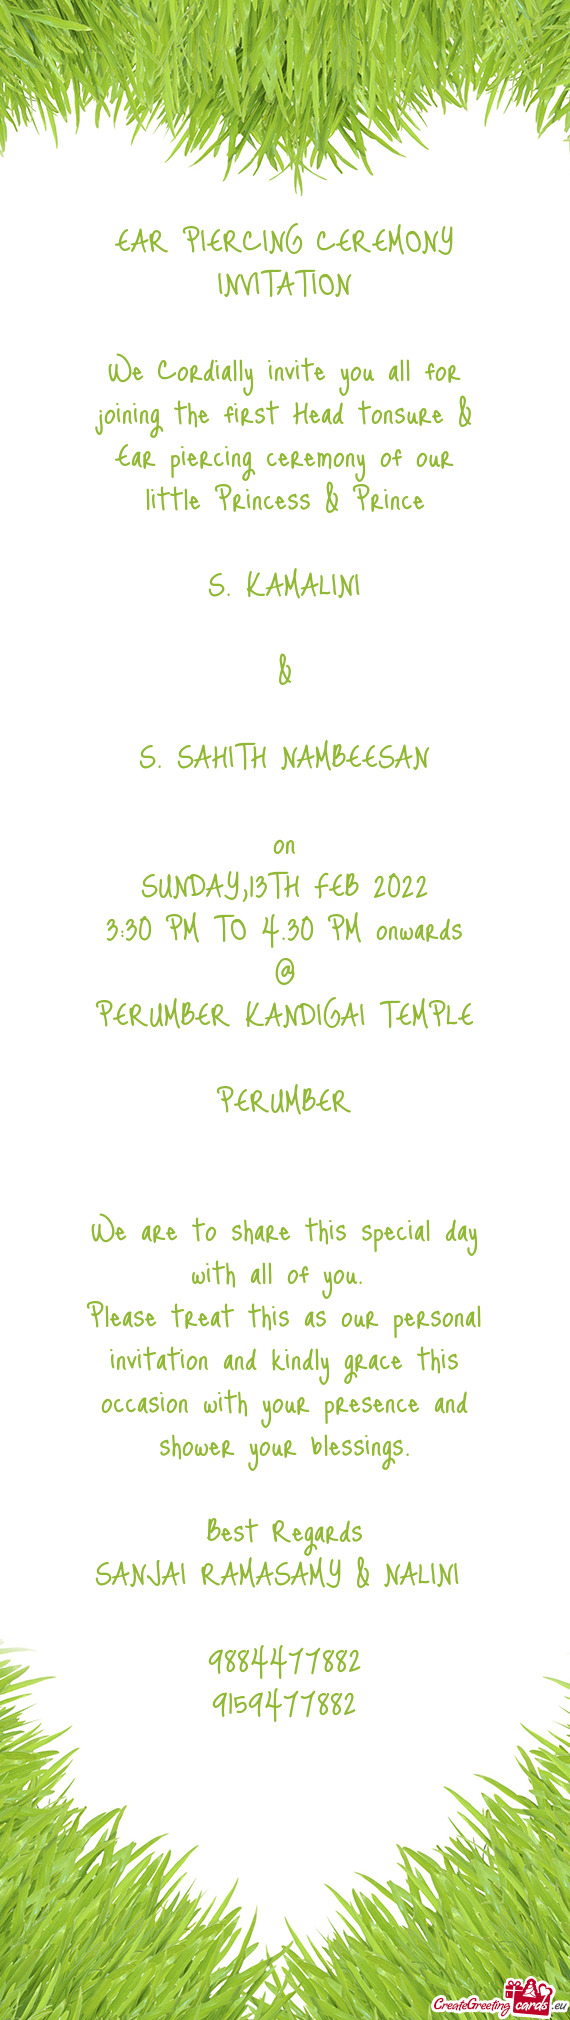 30 PM onwards
 @
 PERUMBER KANDIGAI TEMPLE
 PERUMBER
 
 
 We are to share this special day with all